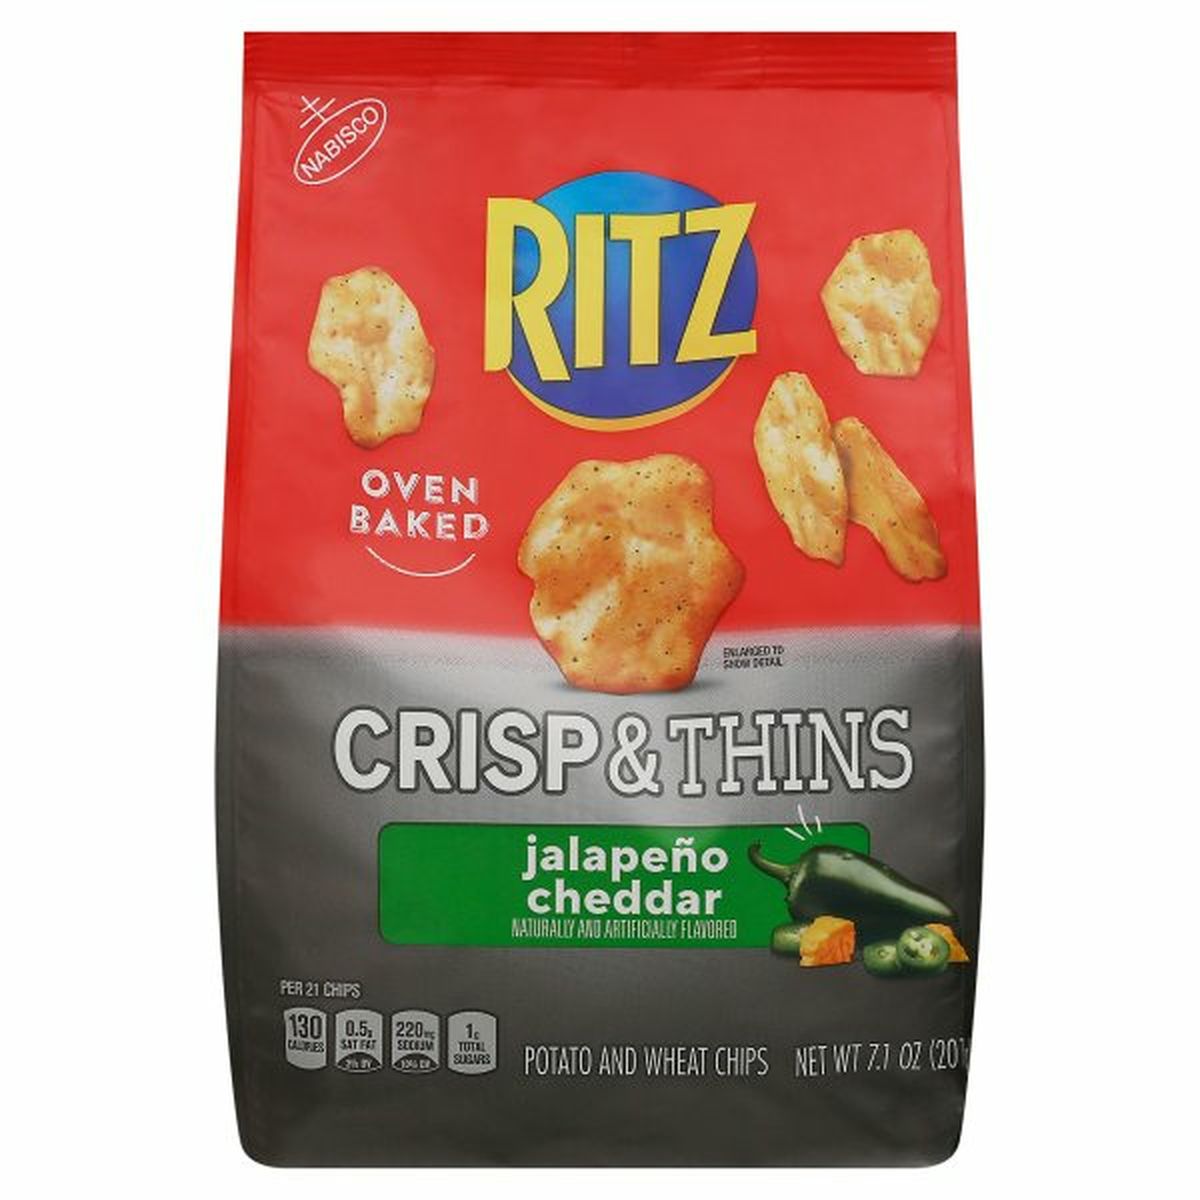 Calories in Ritz Potato and Wheat Chips, Jalapeno Cheddar, Crisp & Thins